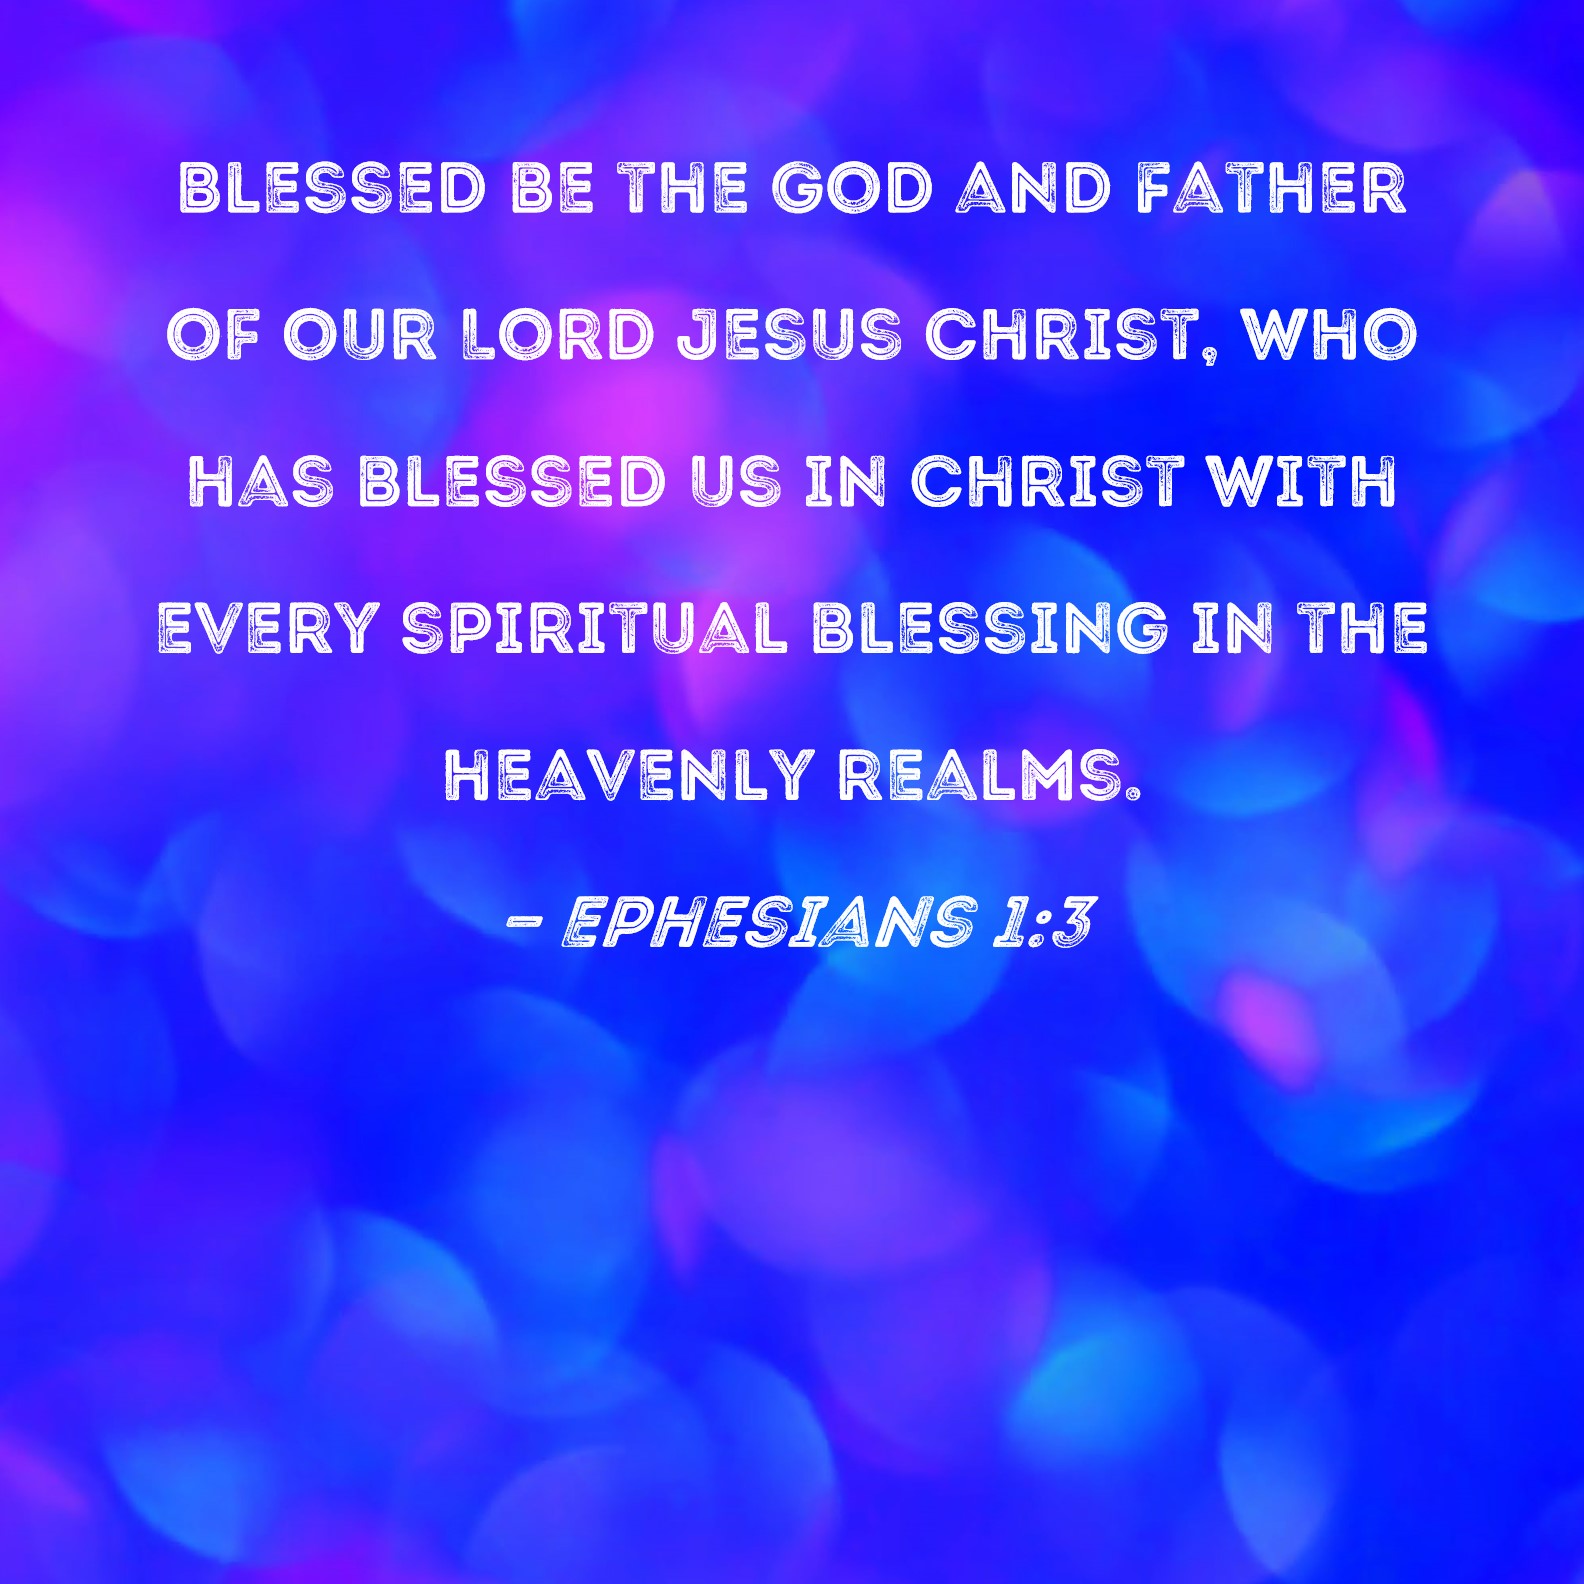 Ephesians 1:3 Blessed be the God and Father of our Lord Jesus Christ, who  has blessed us in Christ with every spiritual blessing in the heavenly  realms.